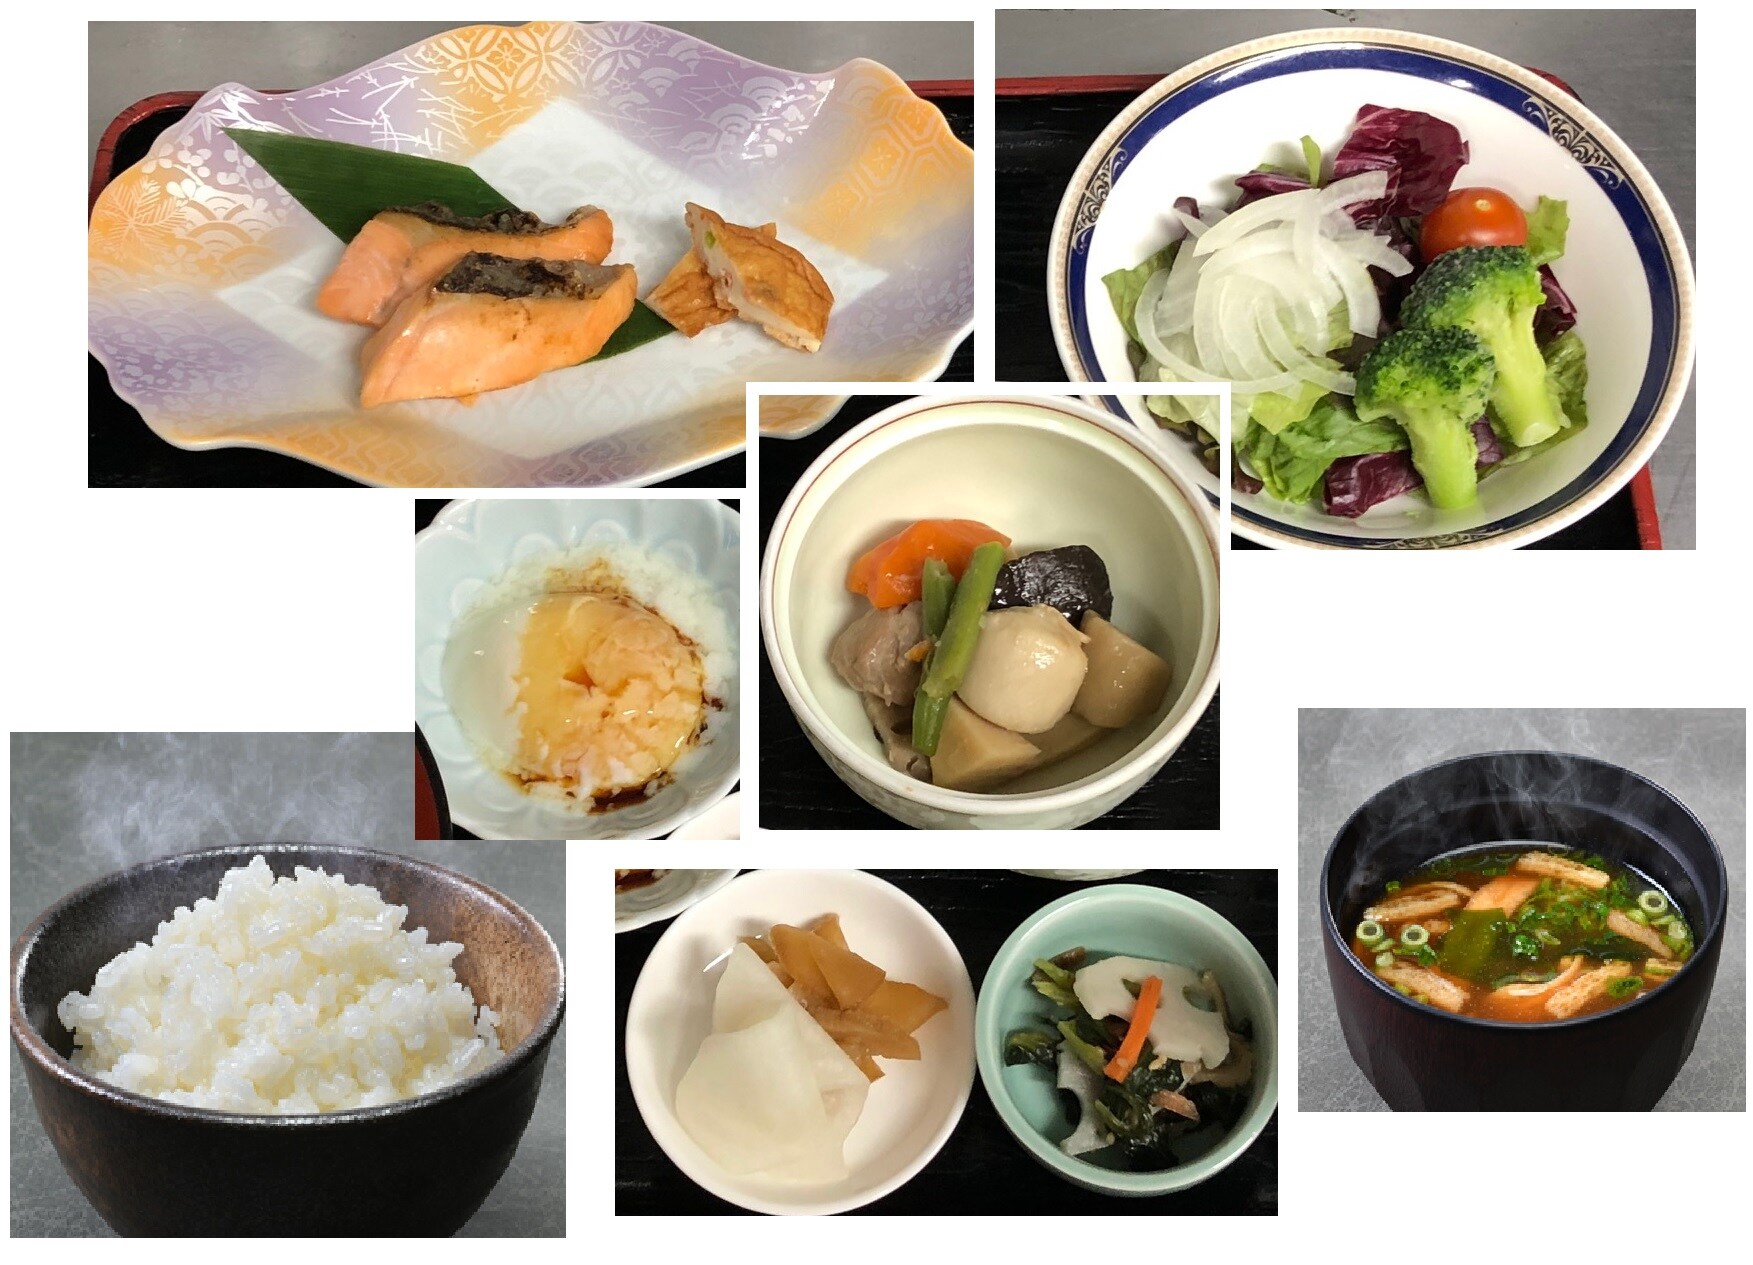 An example of a Japanese set meal